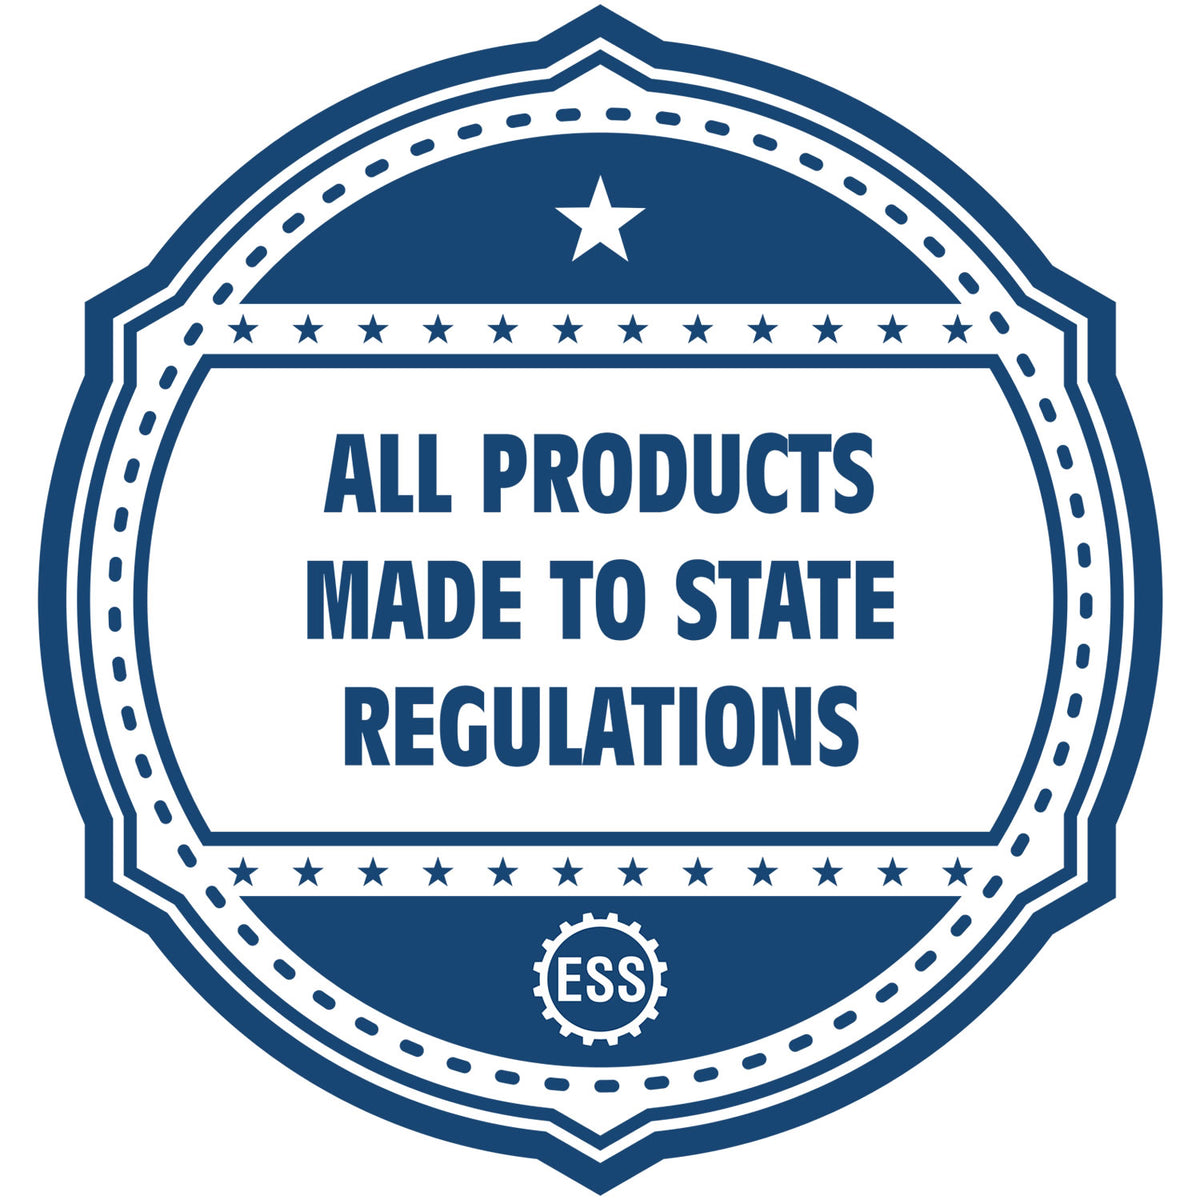 An icon or badge element for the Slim Pre-Inked New York Professional Engineer Seal Stamp showing that this product is made in compliance with state regulations.